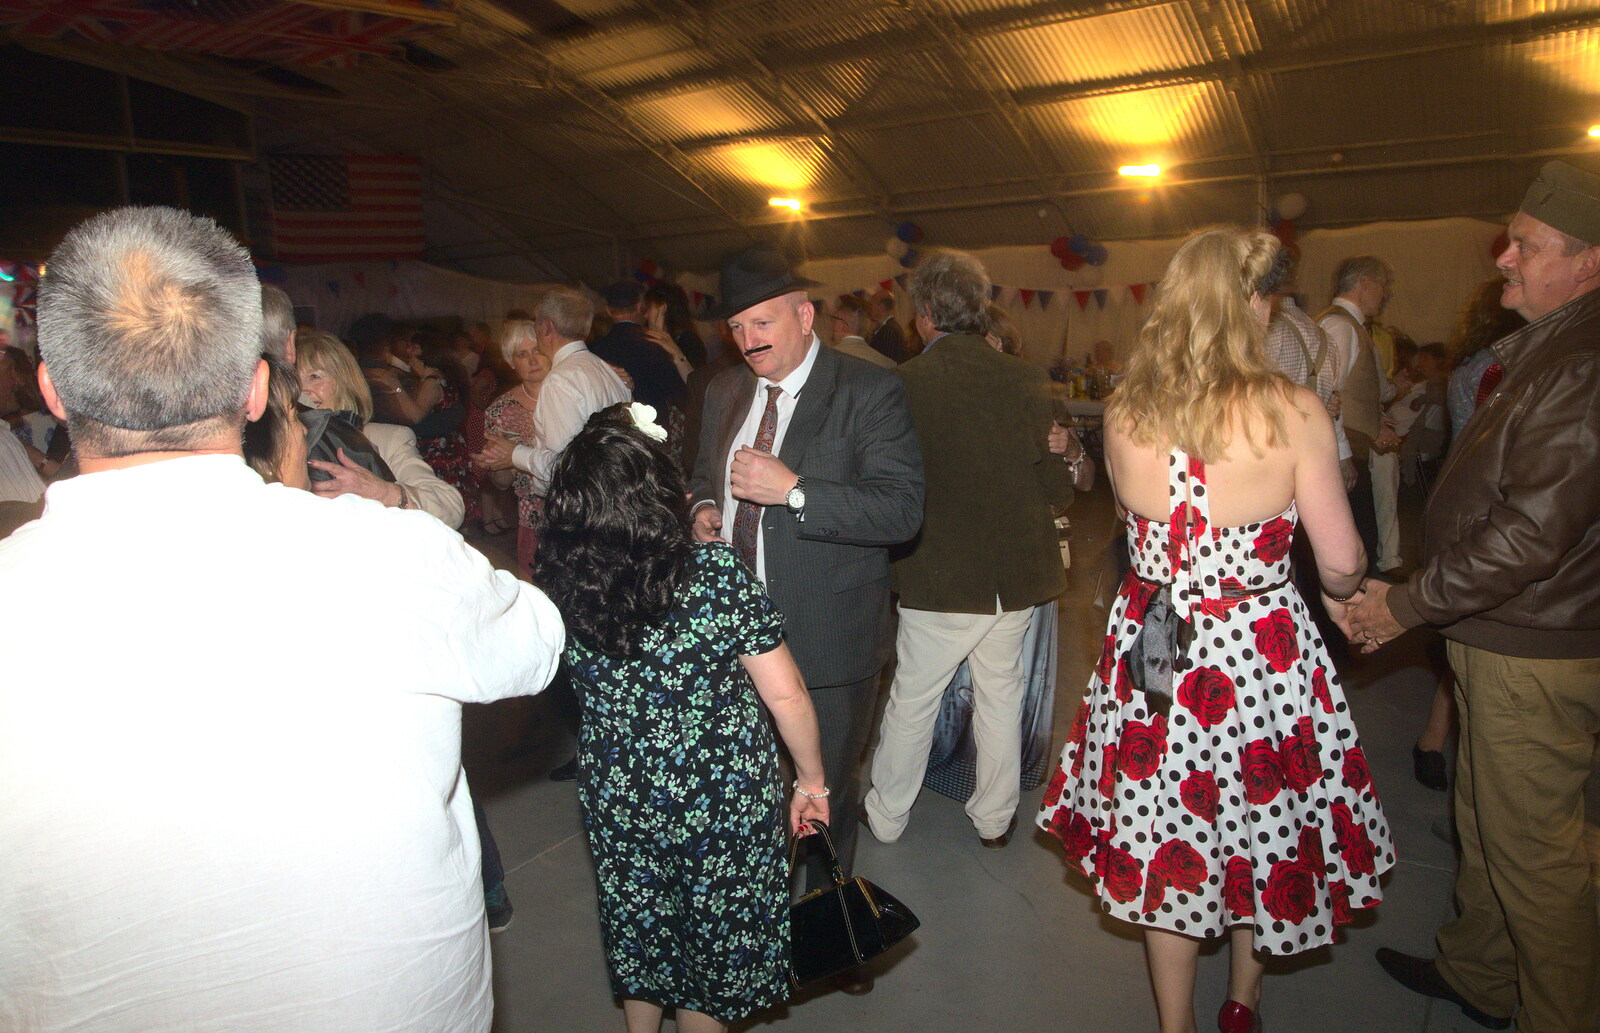 There's more dancing in the hangar from "Our Little Friends" Warbirds Hangar Dance, Hardwick, Norfolk - 9th July 2016